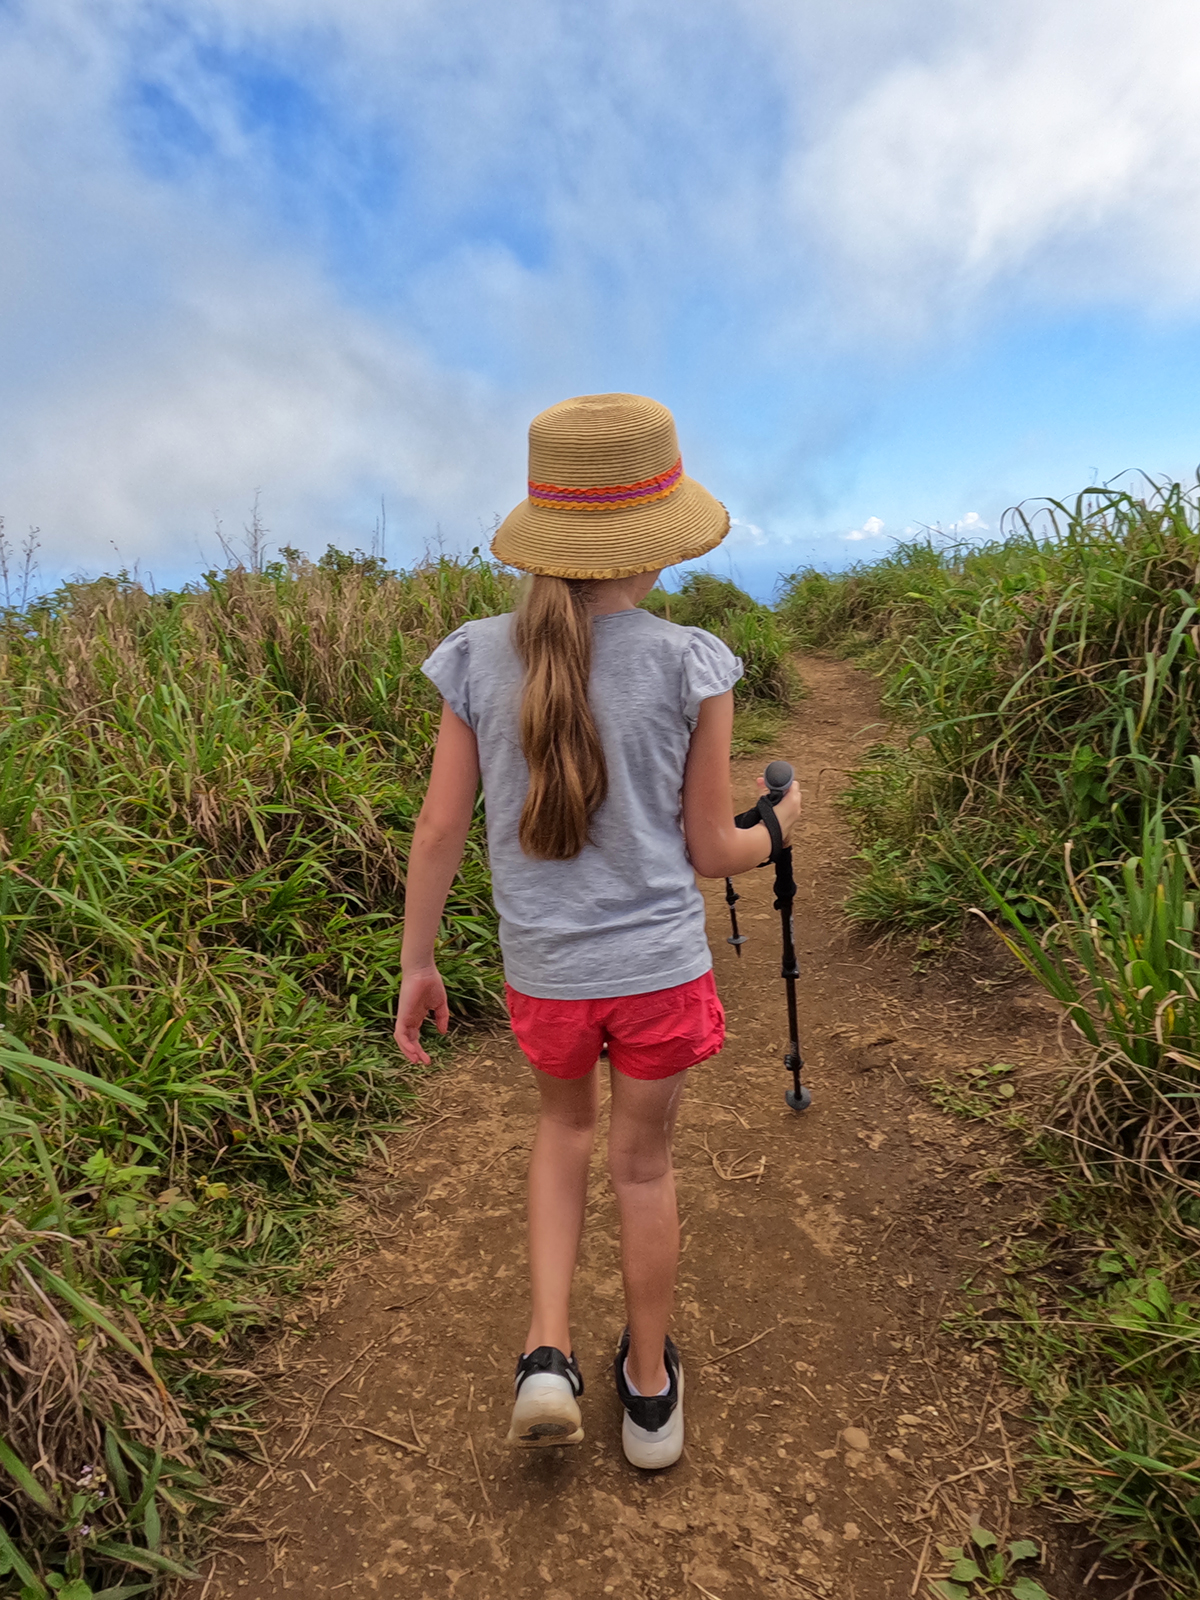 things to do in maui for kids hiking trail girl with long ponytail hikes in wavy grass